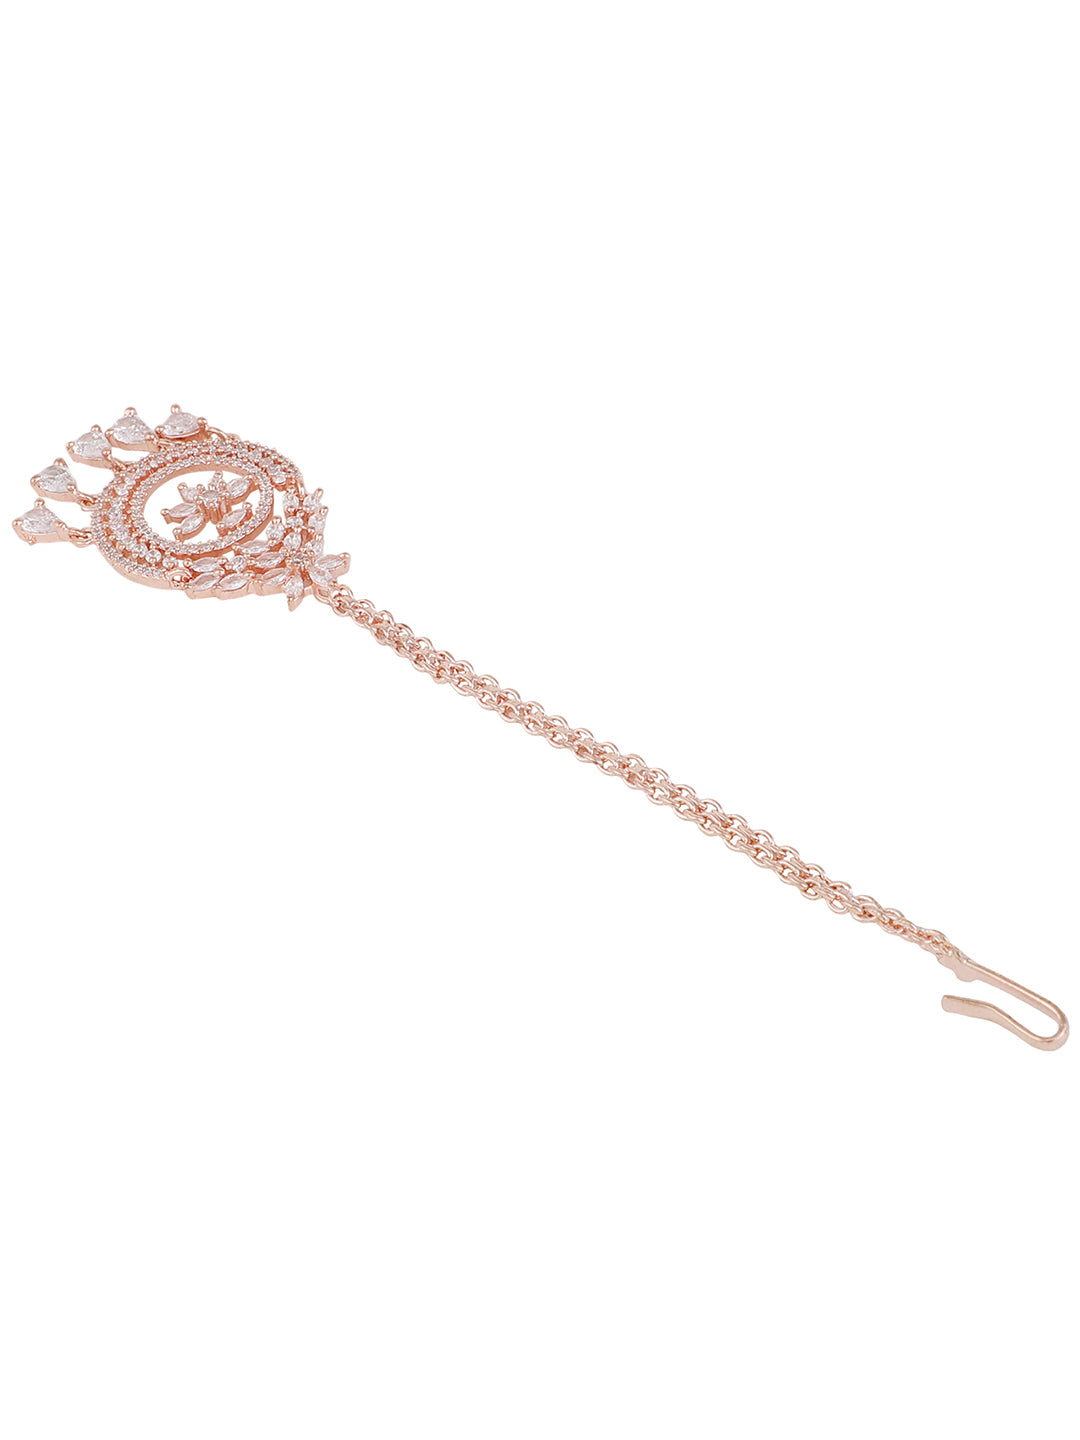 Women's Rose Gold-Plated Ad-Studded Hand Crafted Maangtikka - Anikas Creation